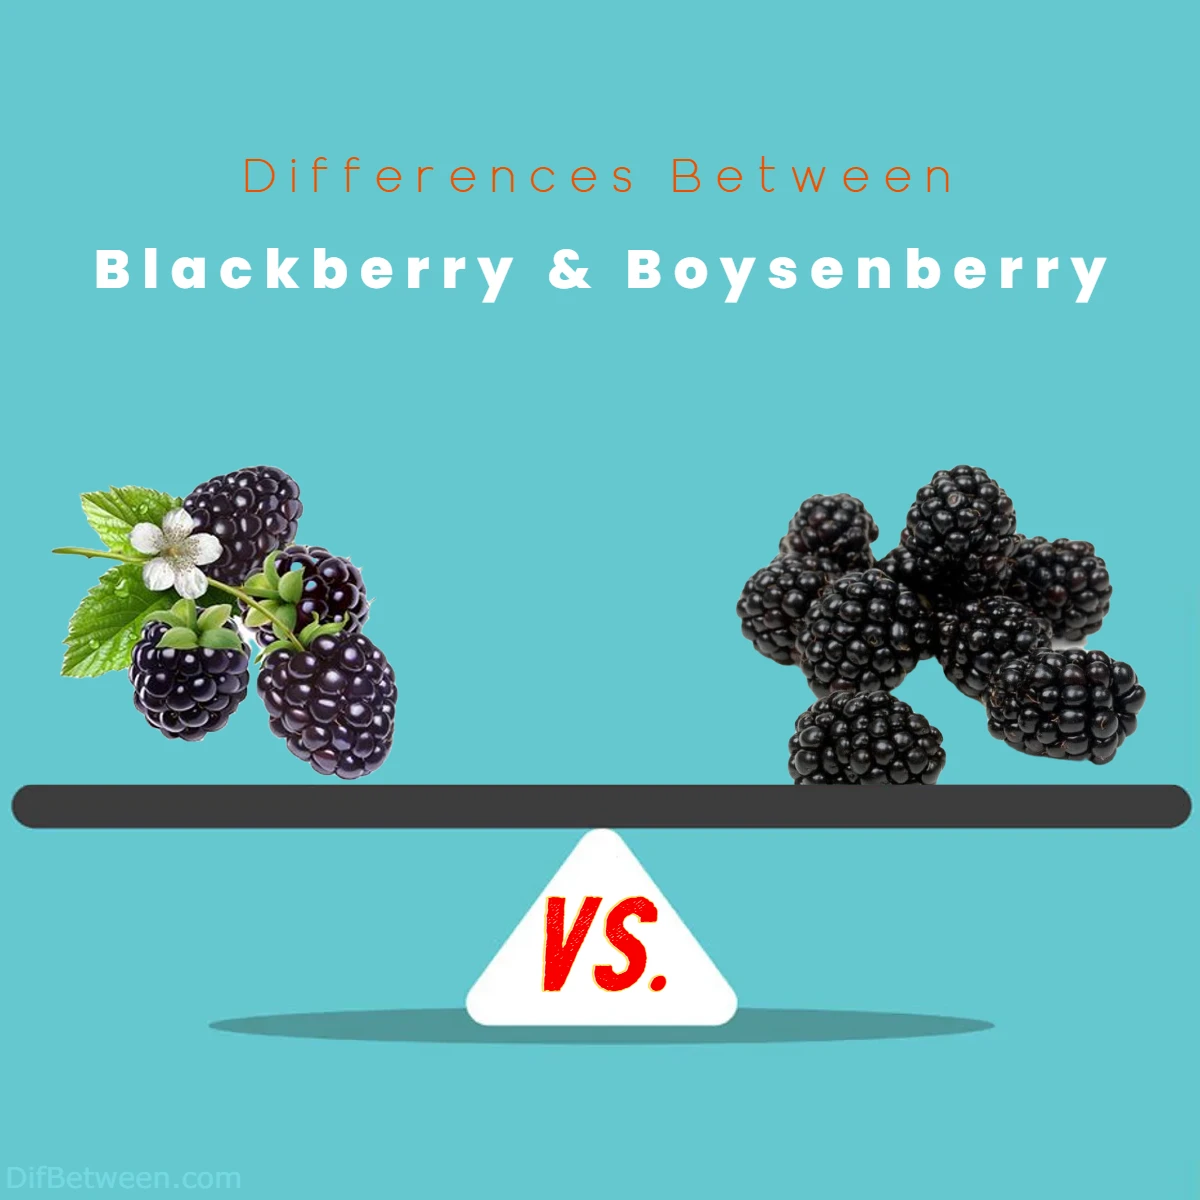 Differences Between Blackberry vs Boysenberry